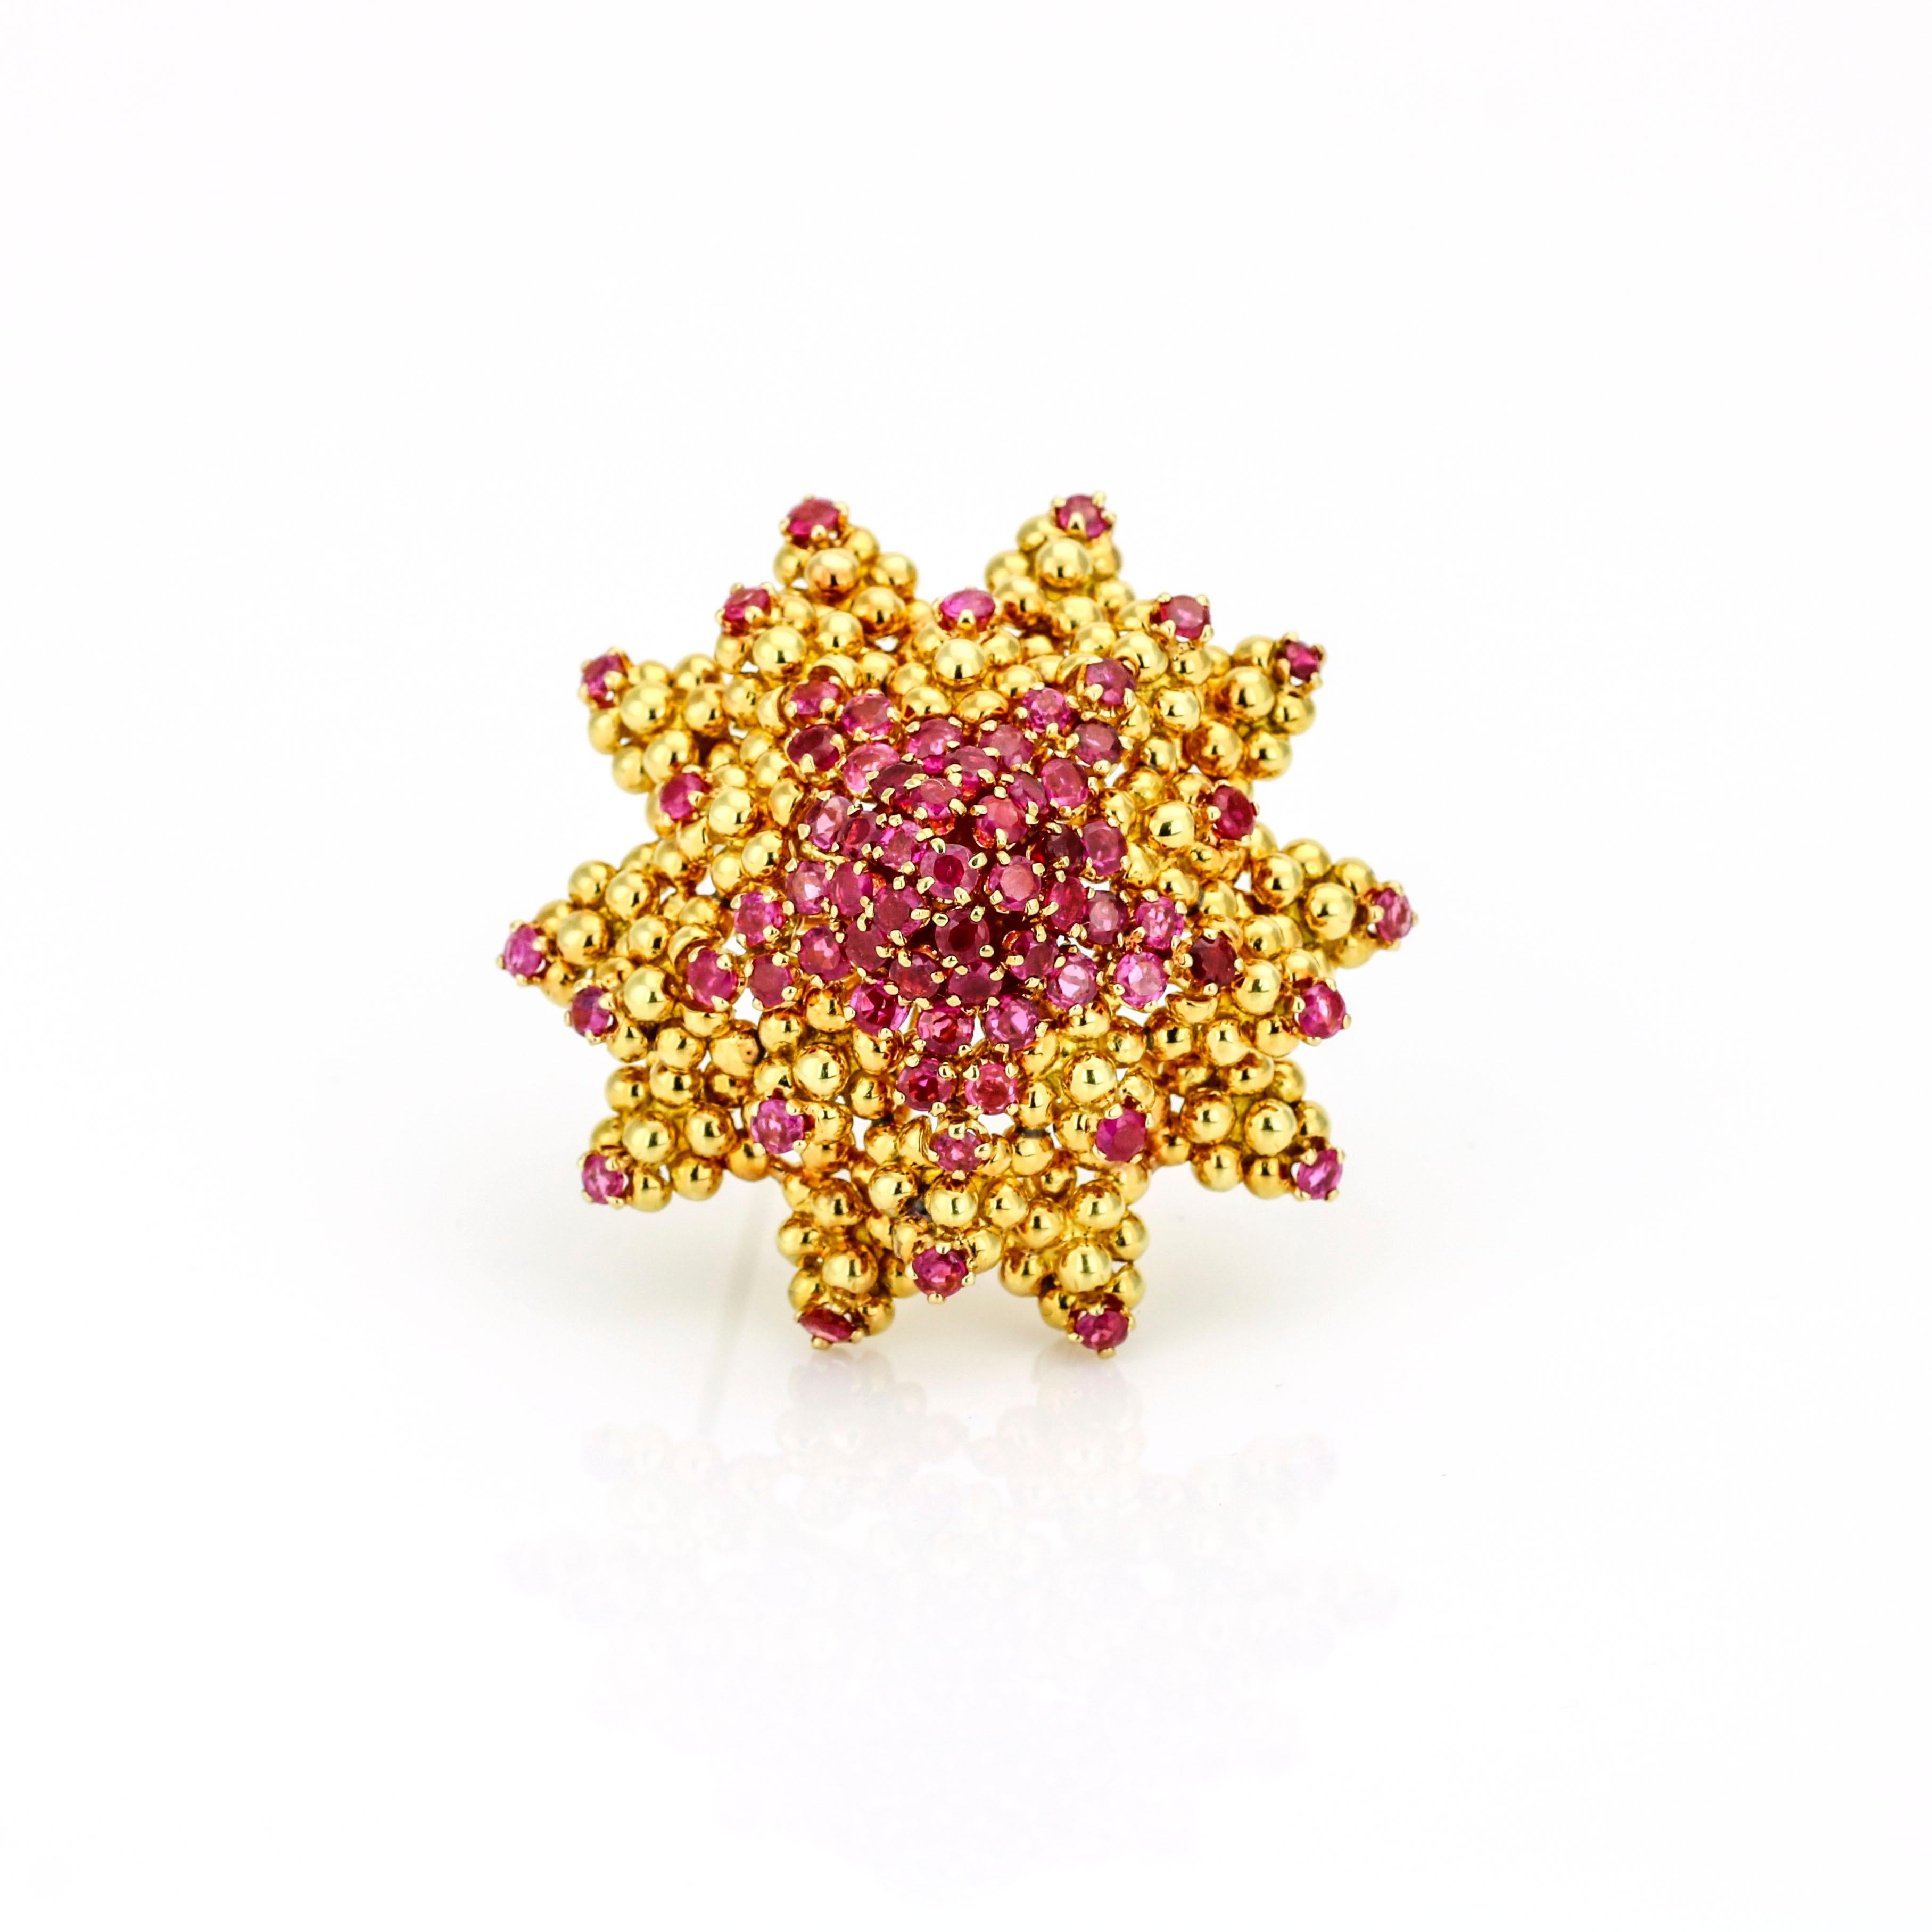 Vintage Tiffany & Co. sun starfish brooch in 18-karat gold with rubies. The starfish is made out of solid gold beads that are prong set with 61 round-cut natural rubies. Made in Italy. Circa 1950s.

Ruby Total Carat Weight, 3.35 carats